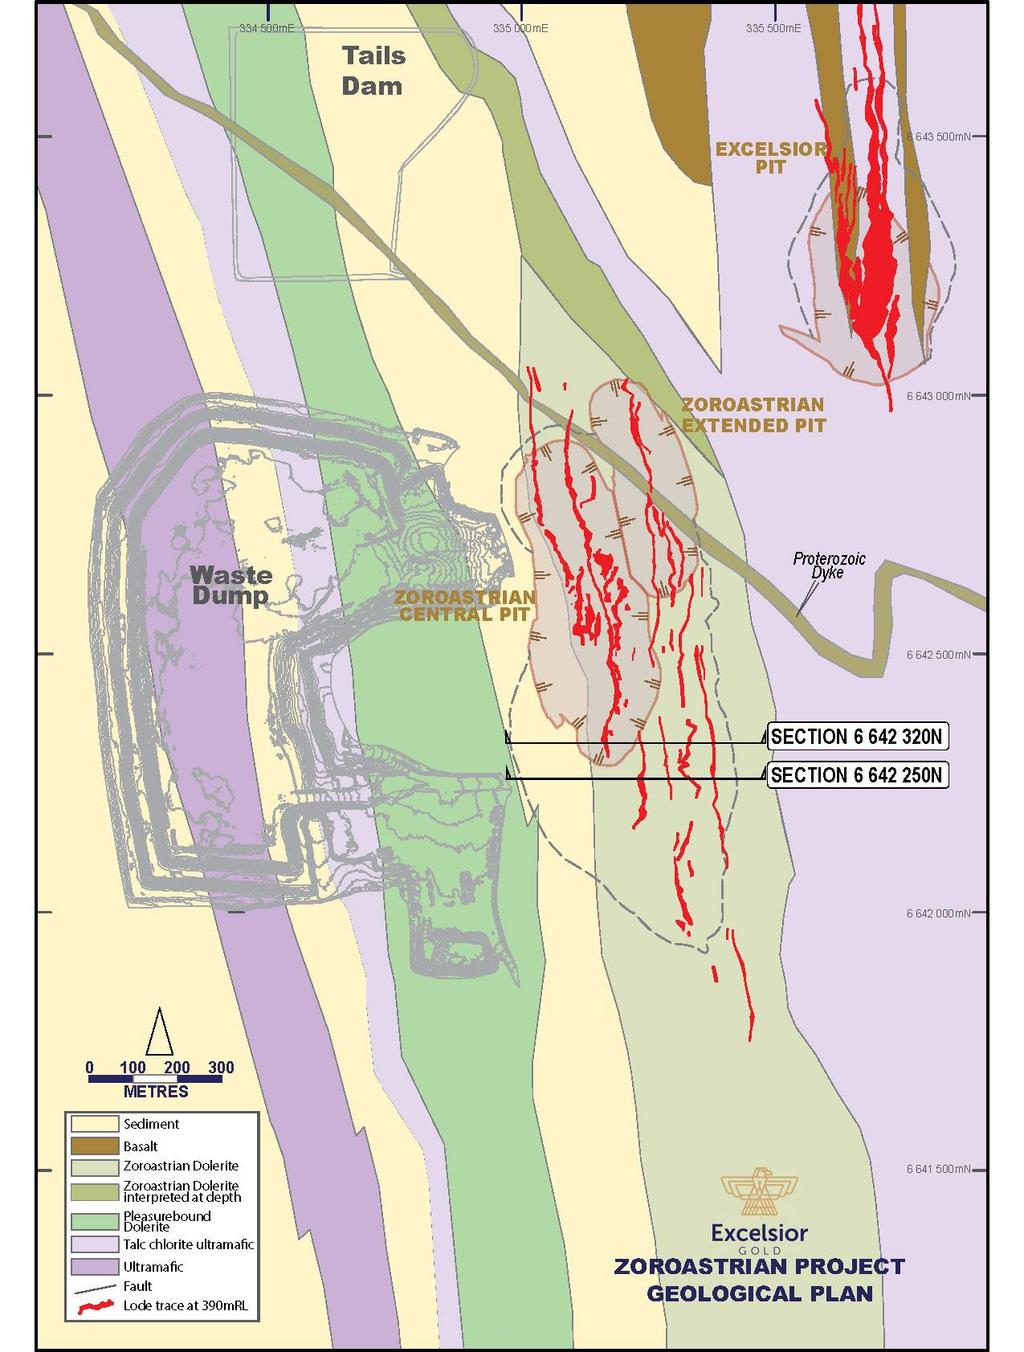 Zoroastrian & Excelsior Deposits Almost 80% of the current 954,000oz Mineral Resource is associated with the Excelsior and Zoroastrian deposits Focus of resource definition drilling and